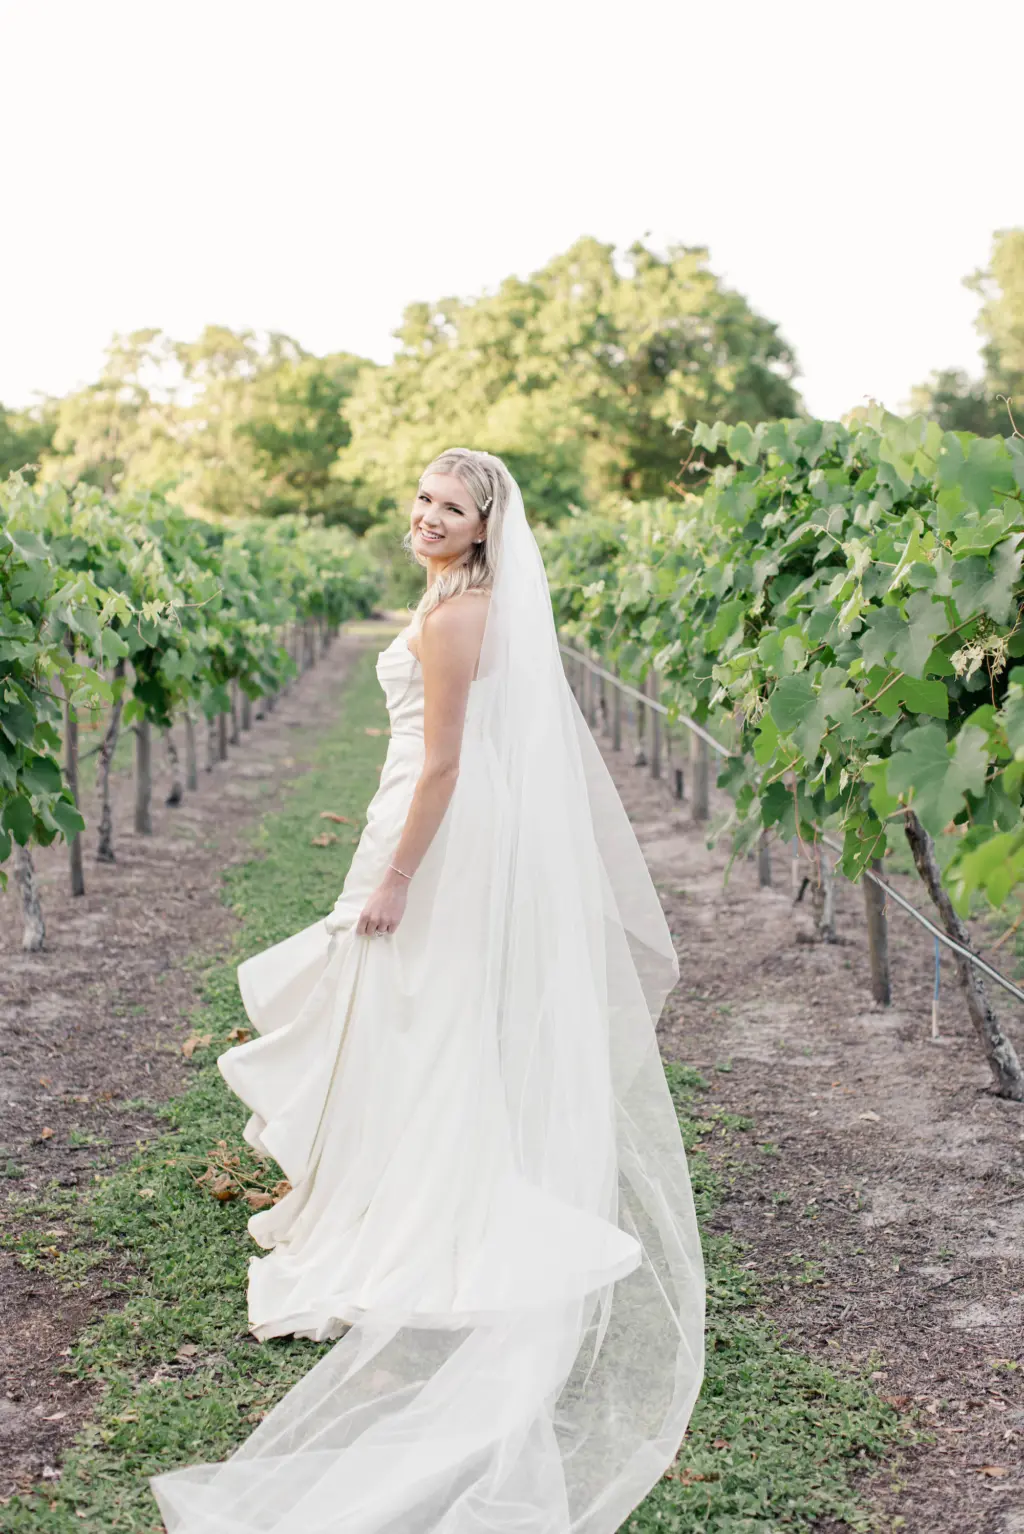 Bride Walking Through Vineyard in Ivory Strapless Chiffon Fit and Flare Wedding Dress Ideas | Cathedral Bridal Veil Inspiration | Tampa Bay Boutique Truly Forever Bridal | Fiorelli Winery